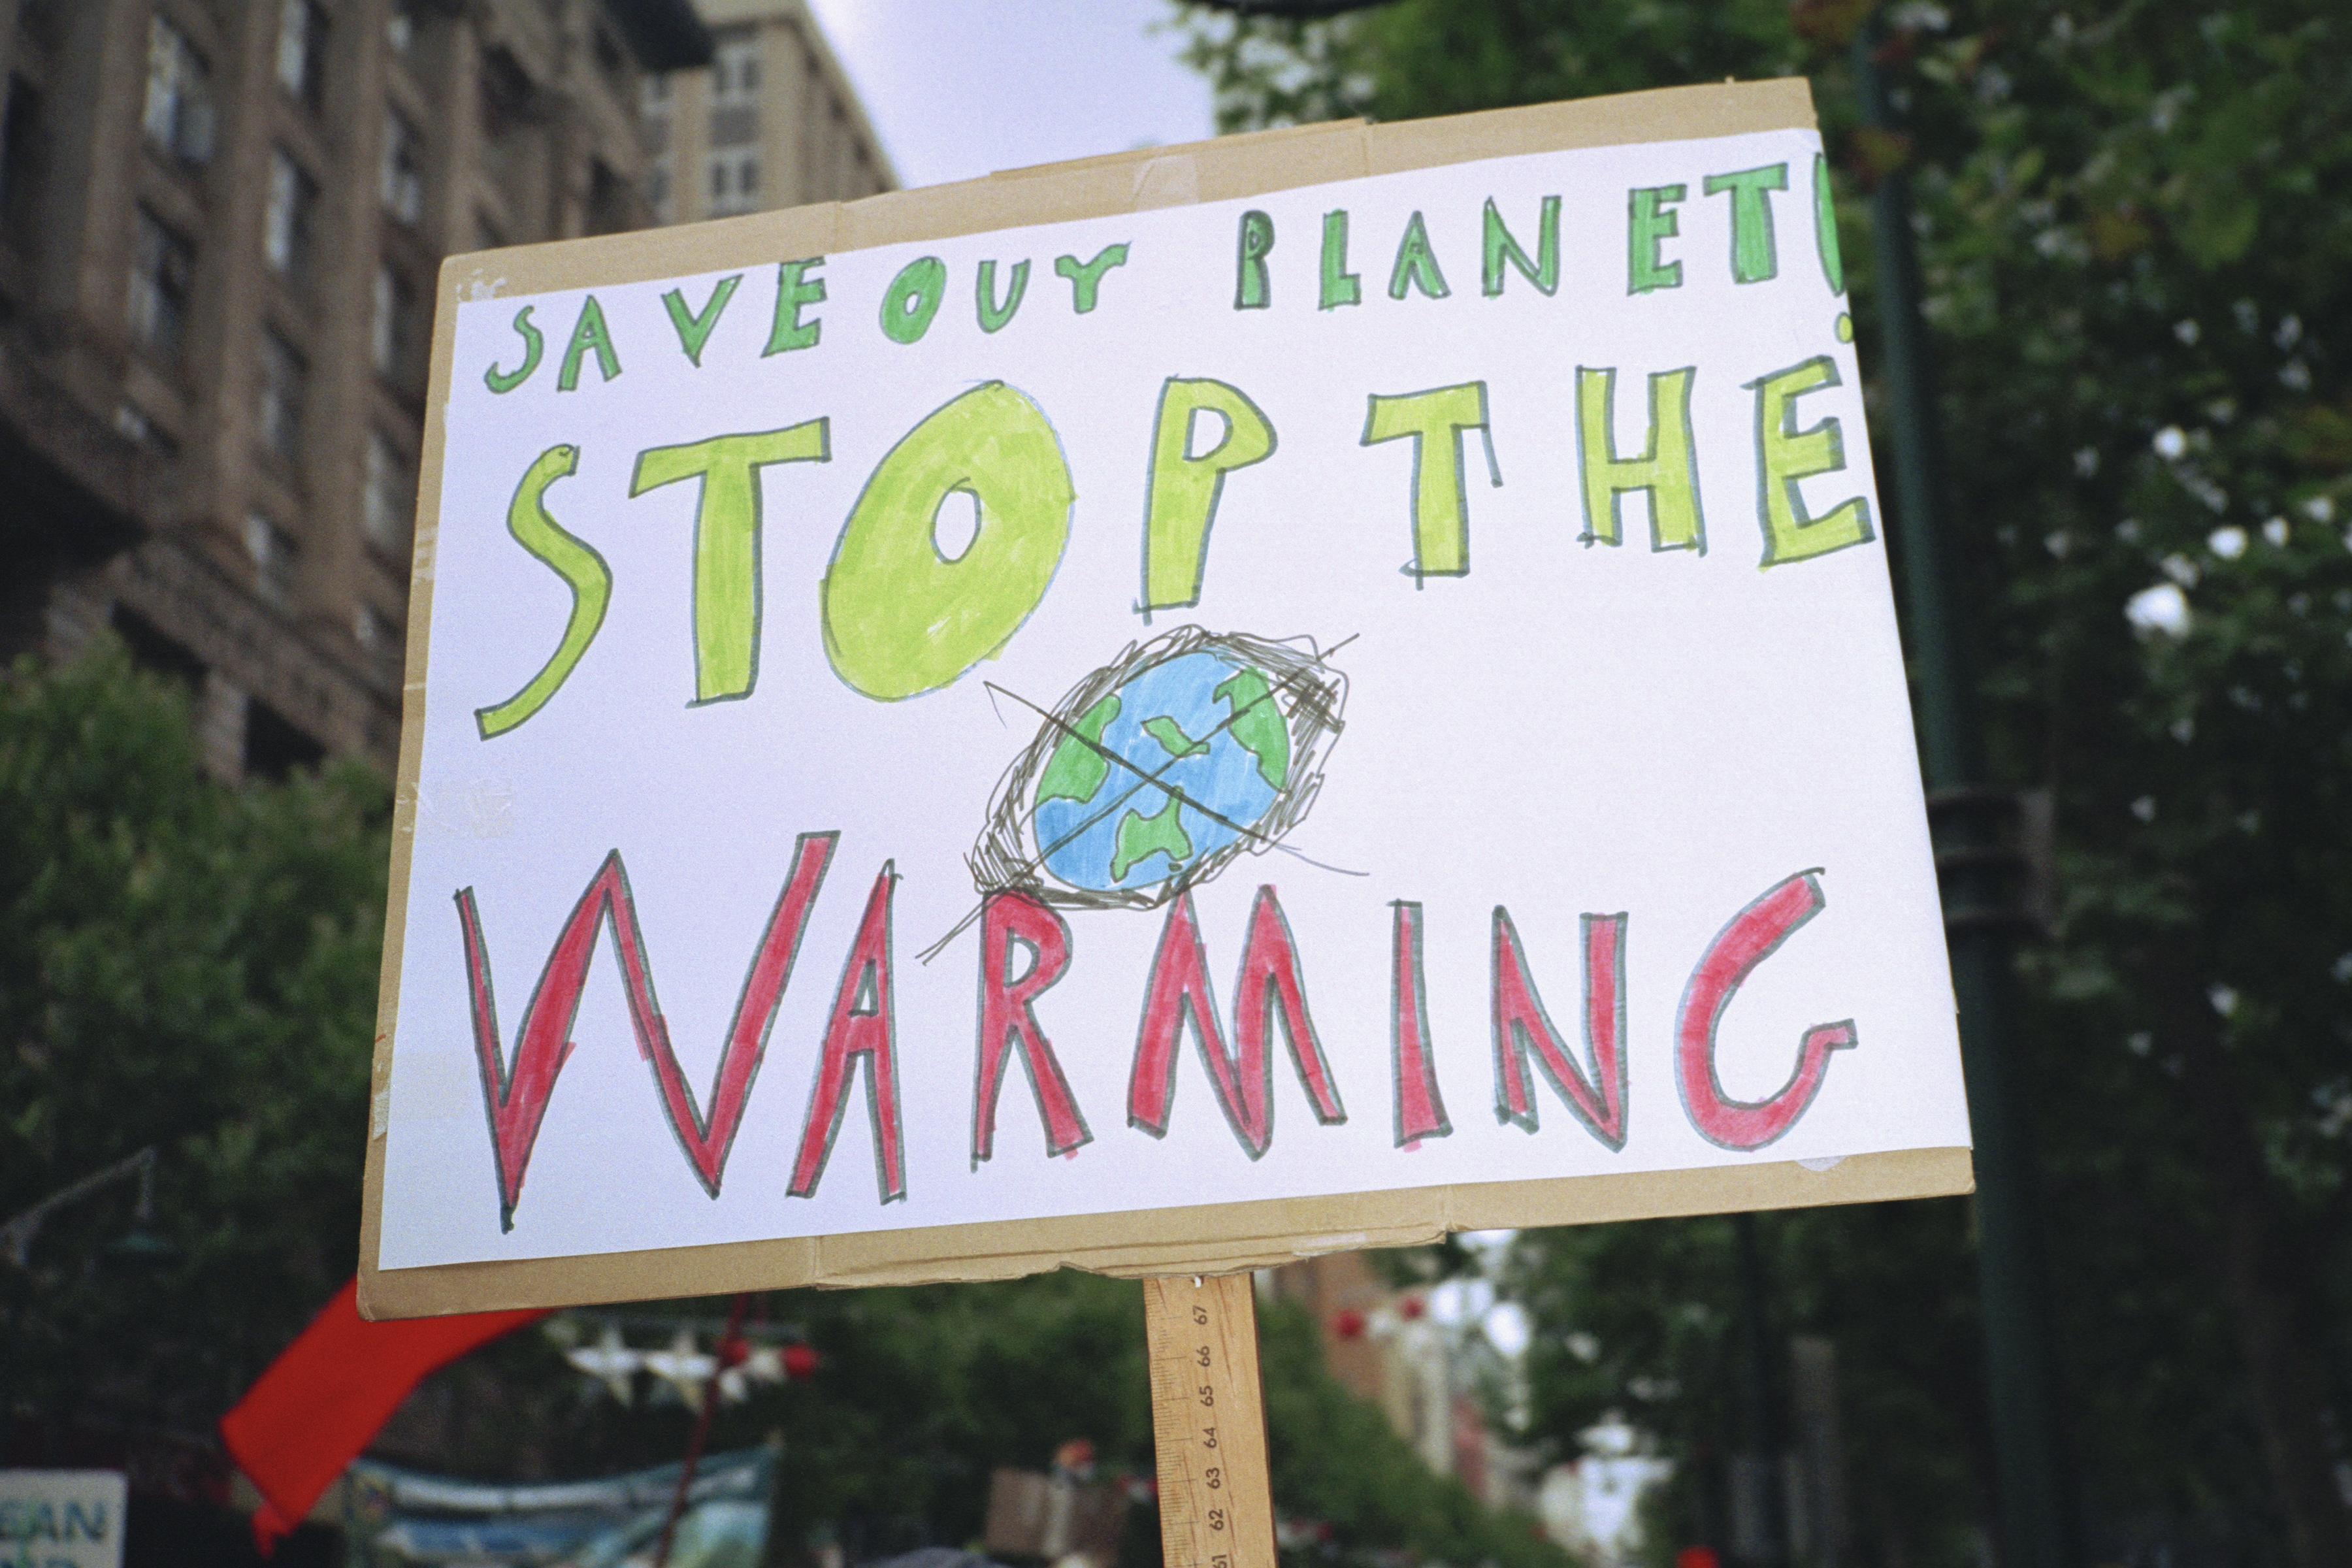 A global warming placard on display in a city. (Getty Images)